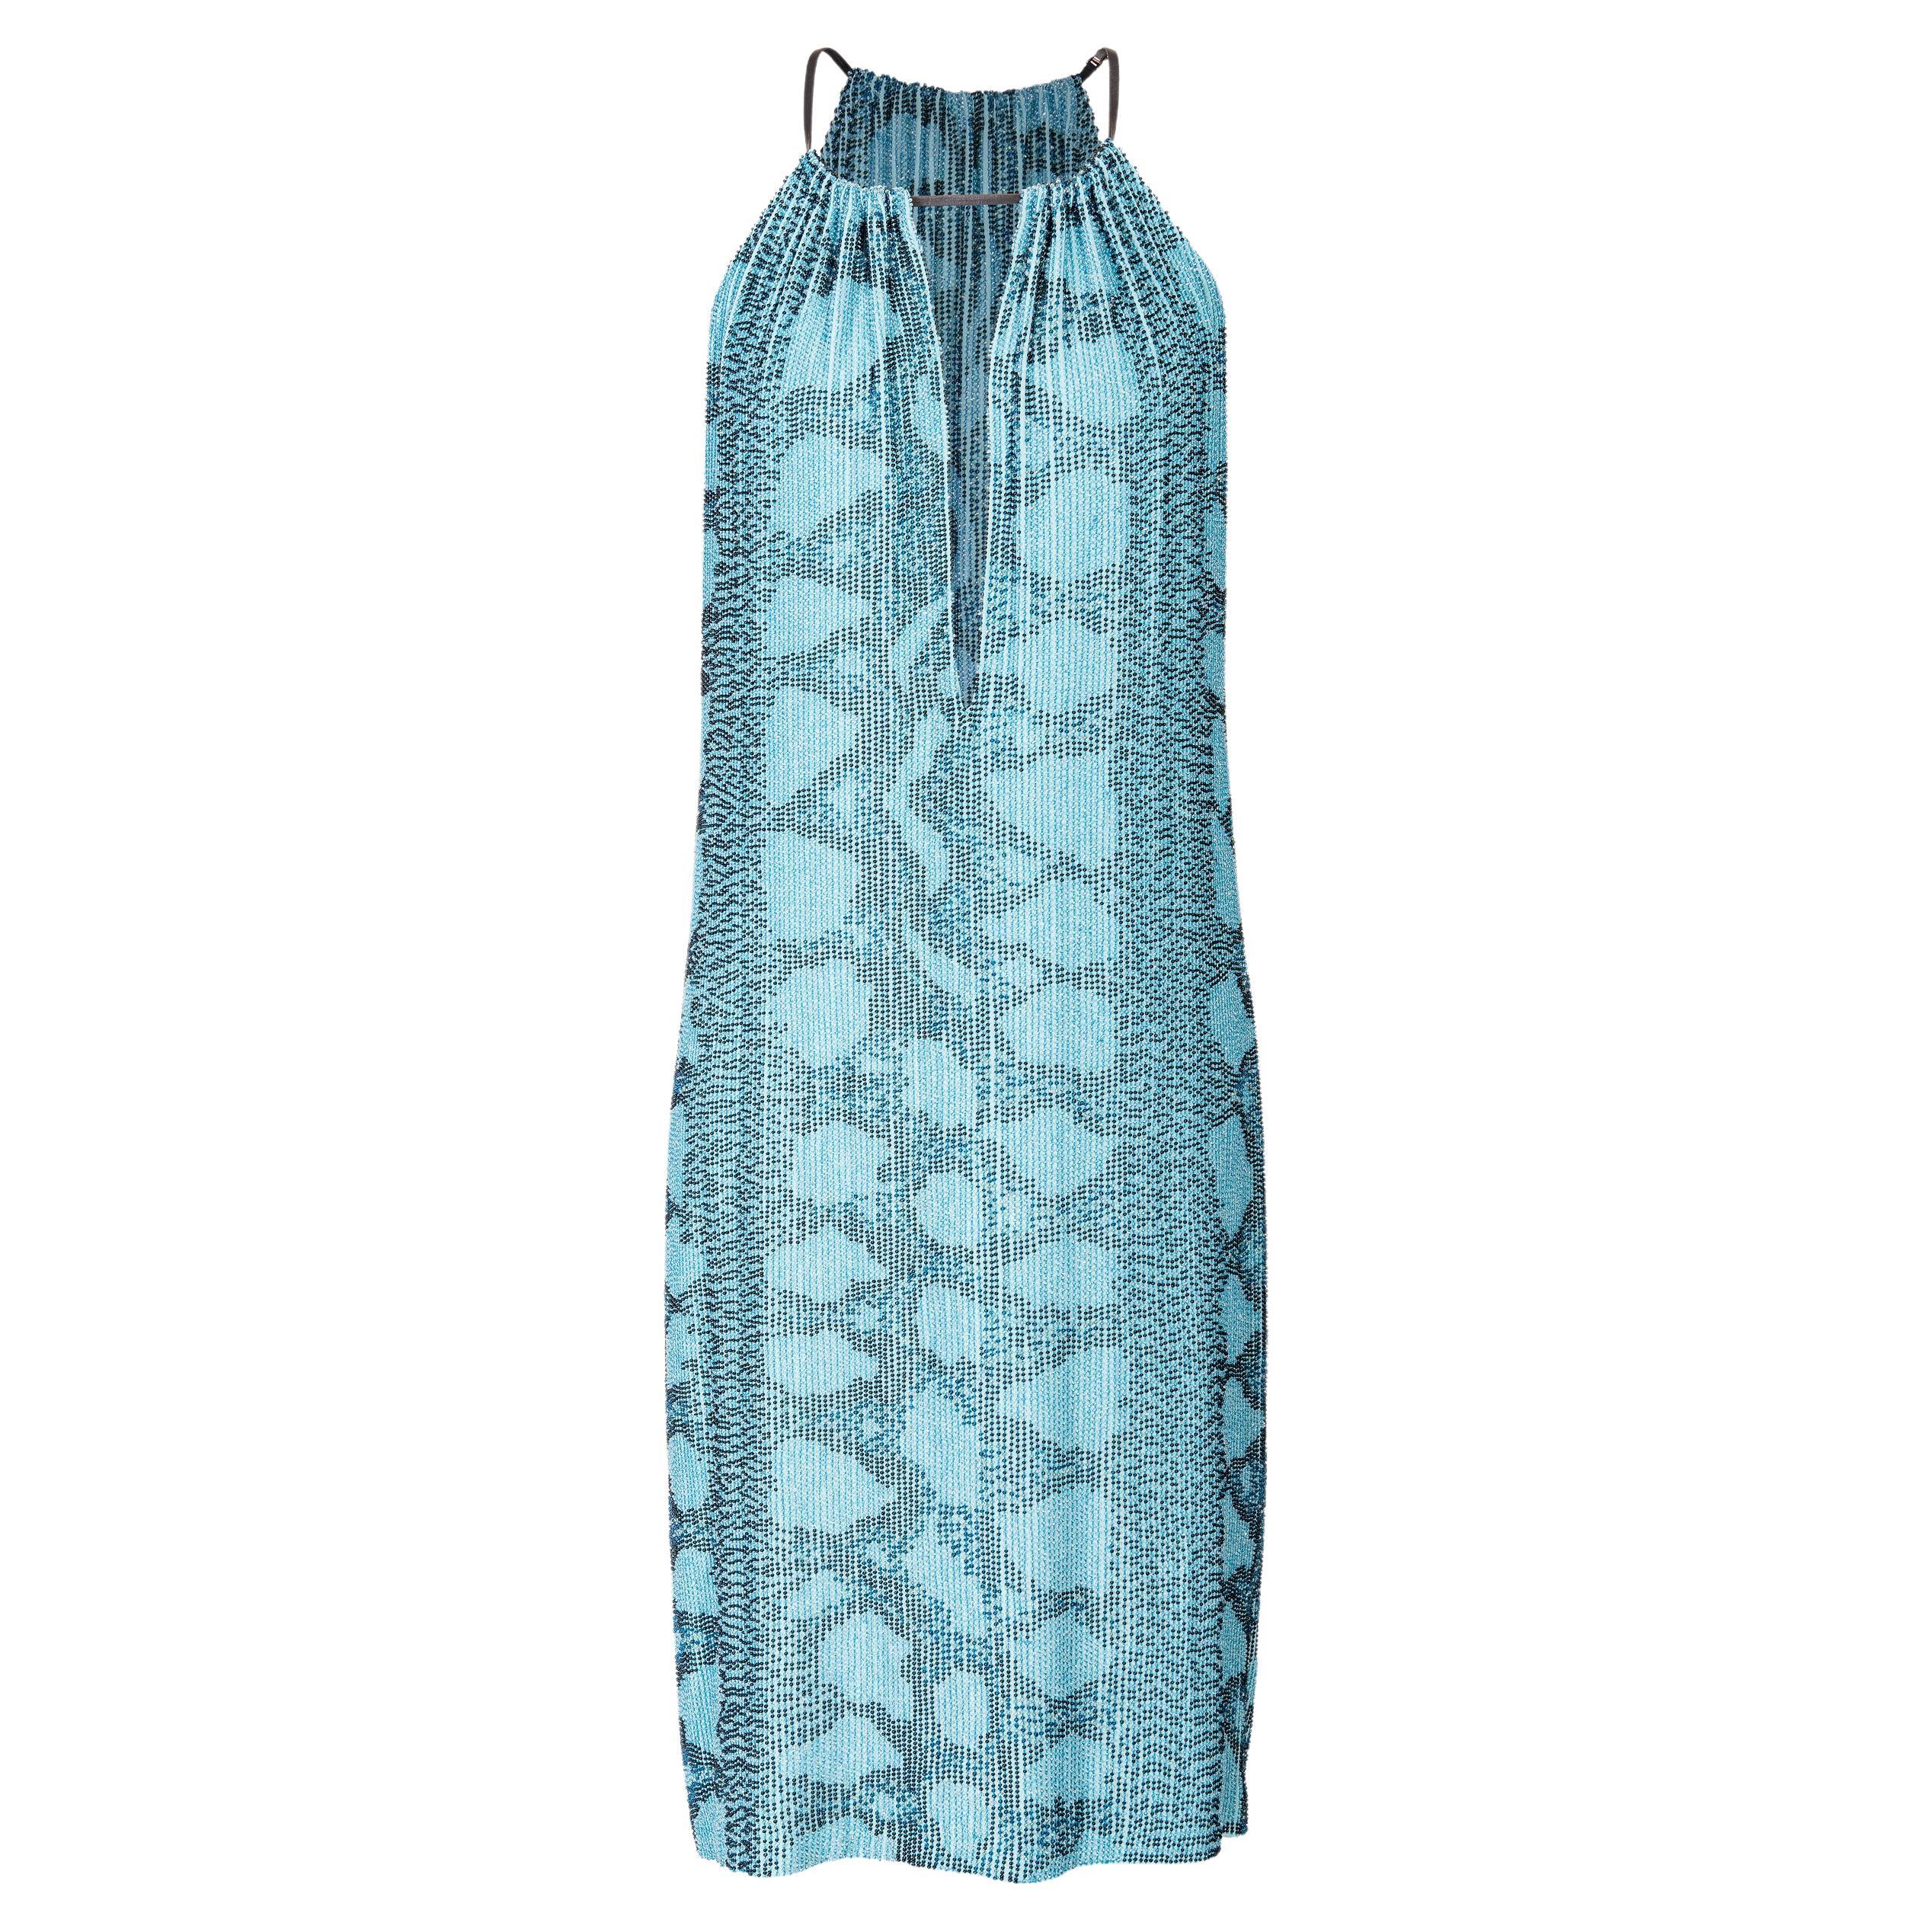 S/S 2000 Gucci by Tom Ford Fully Beaded Turquoise Snakeskin Pattern Dress